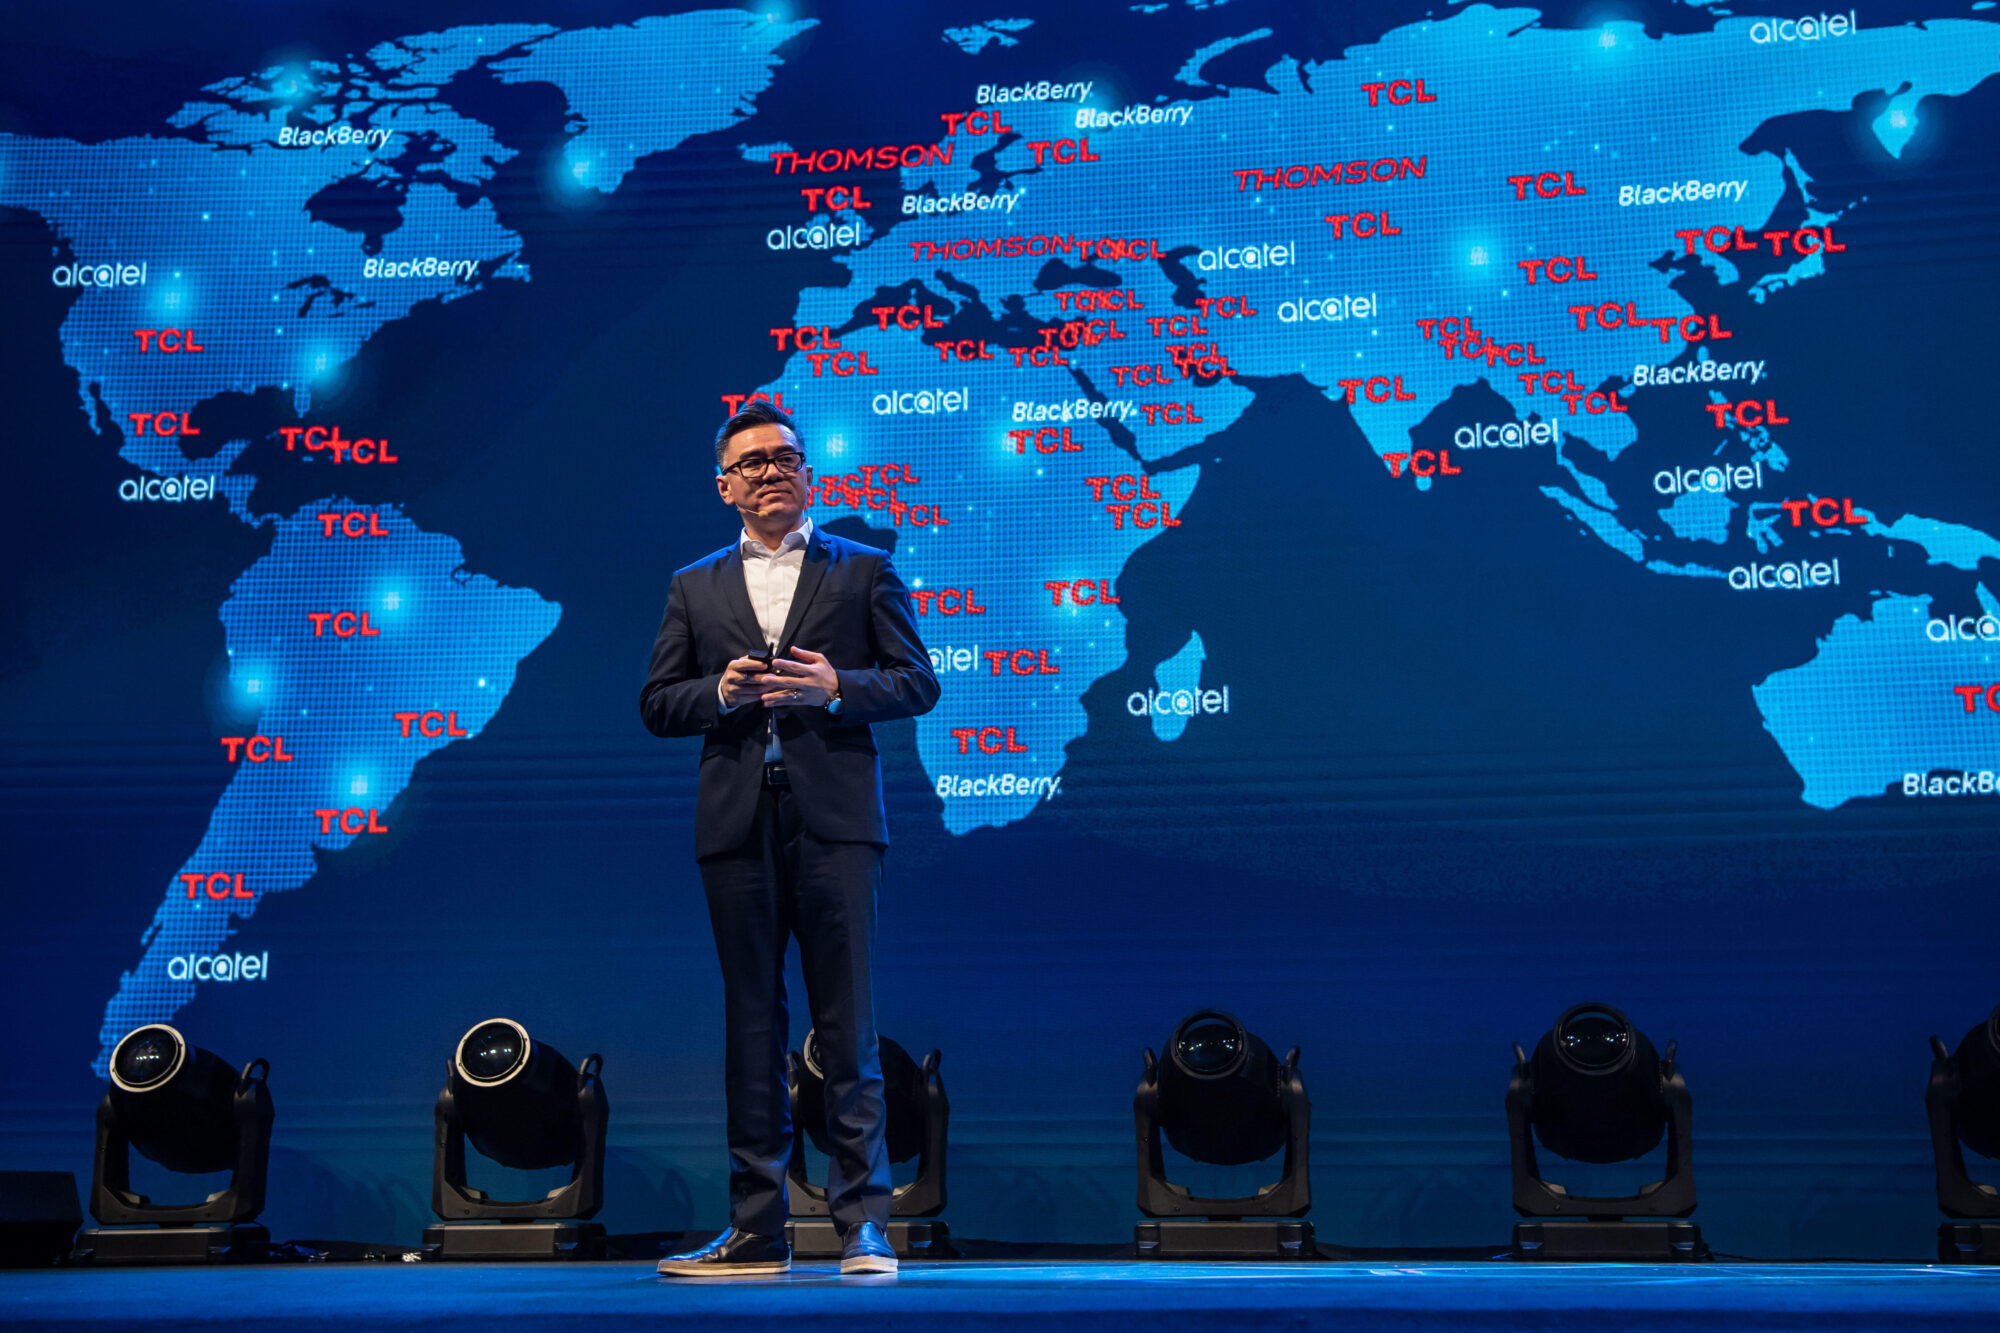 Kevin Wang Cheng, former CEO of TCL Multimedia Technology Holdings Limited, on a stage with a map of the world behind him.